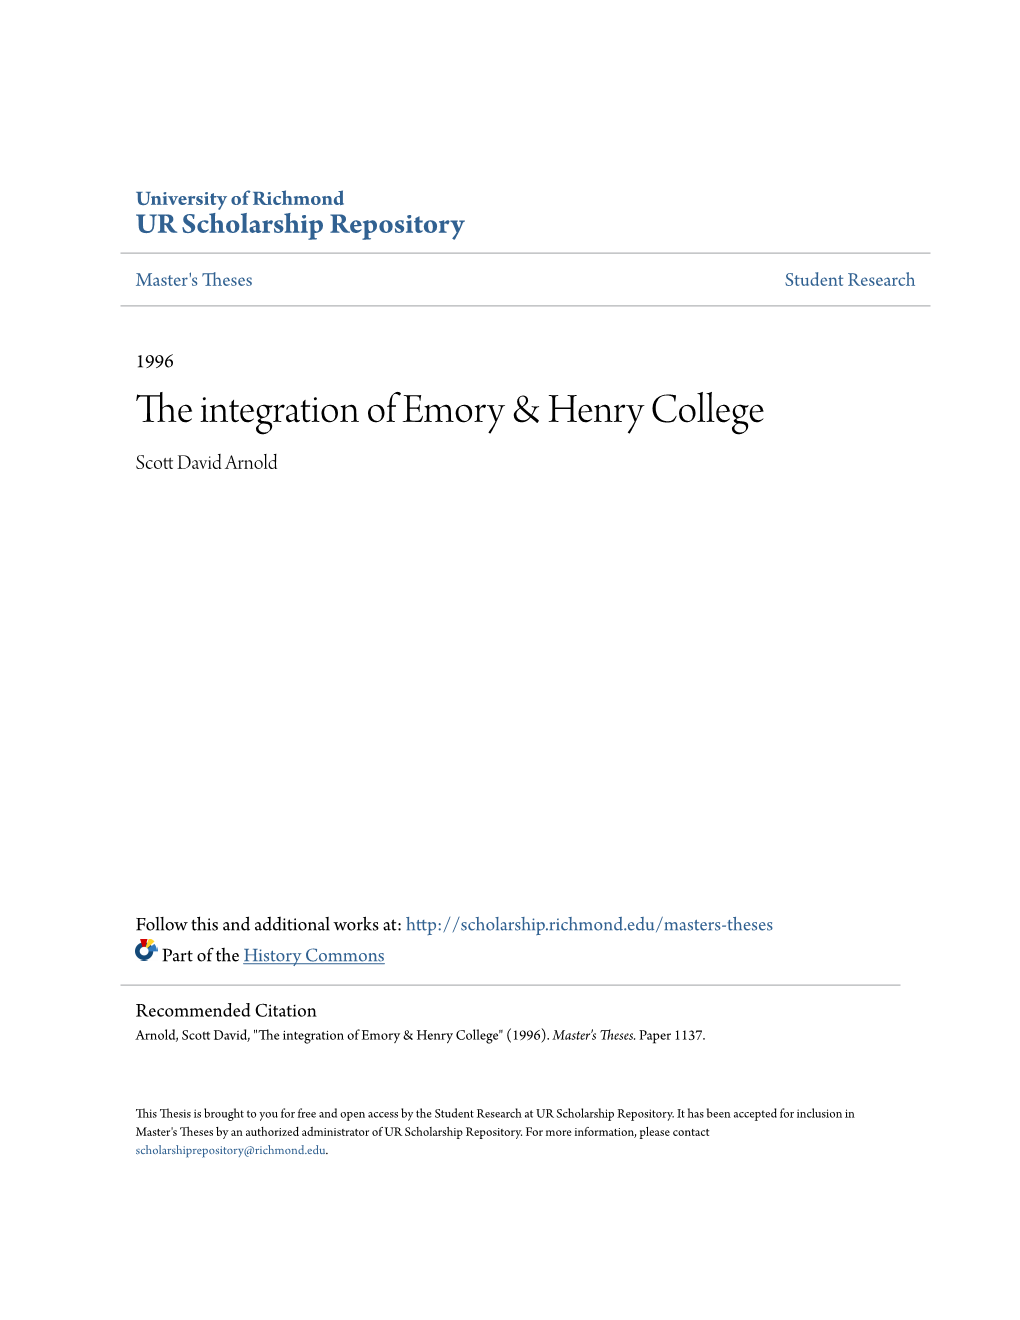 The Integration of Emory & Henry College